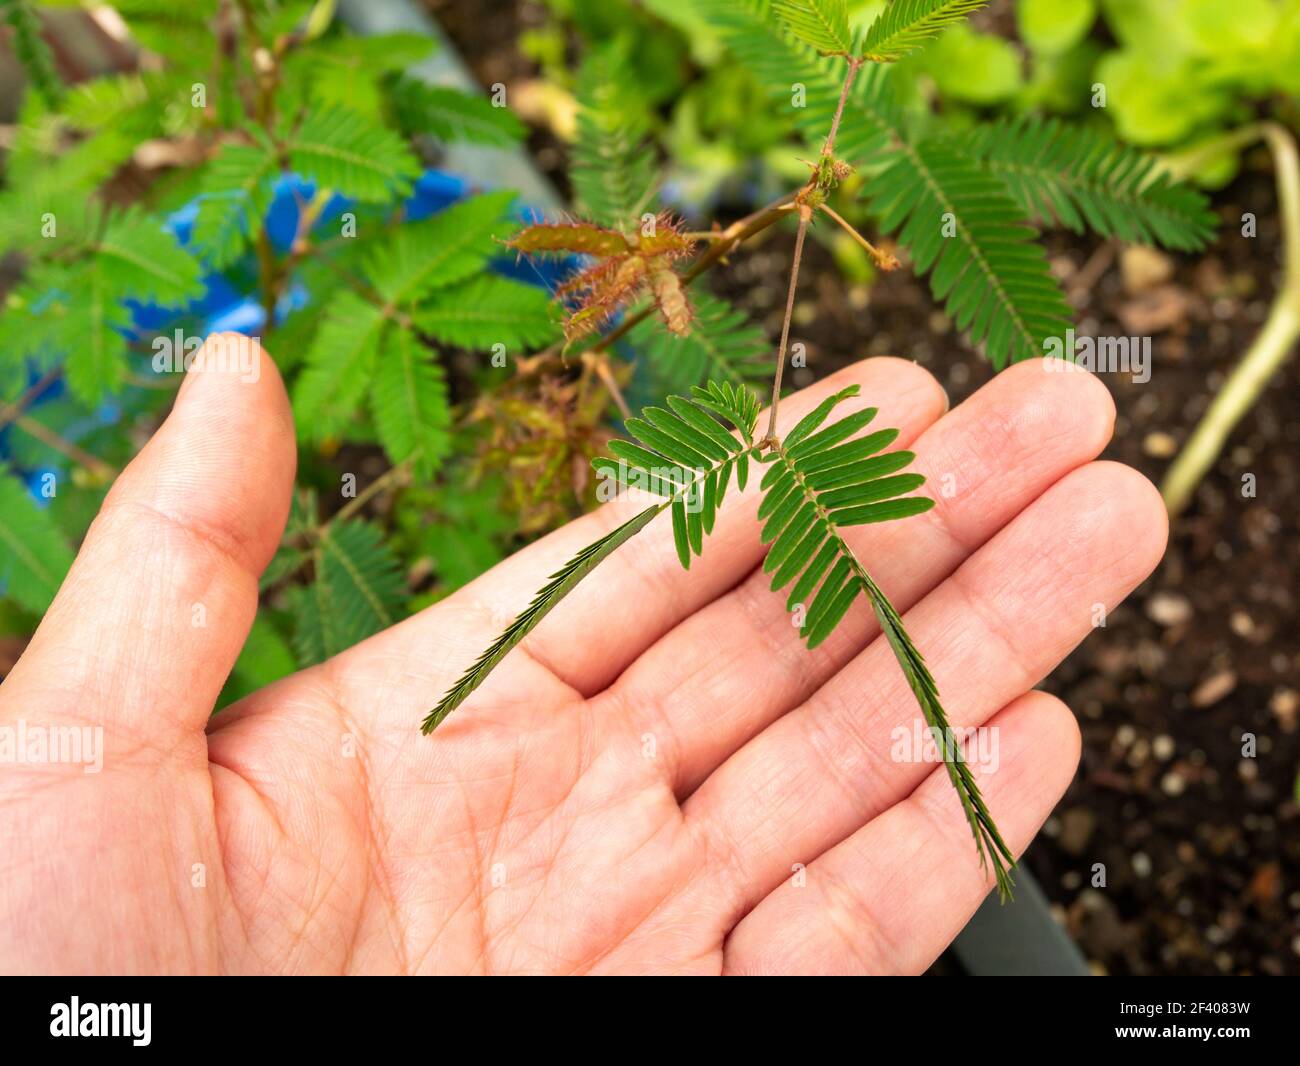 Mimosa Pudica also Called Sensitive Plant, Sleepy Plant, Action Plant, Touch-me-not, Shameplant. Its Leaves Fold Inward and Fall off when Touched, and Stock Photo